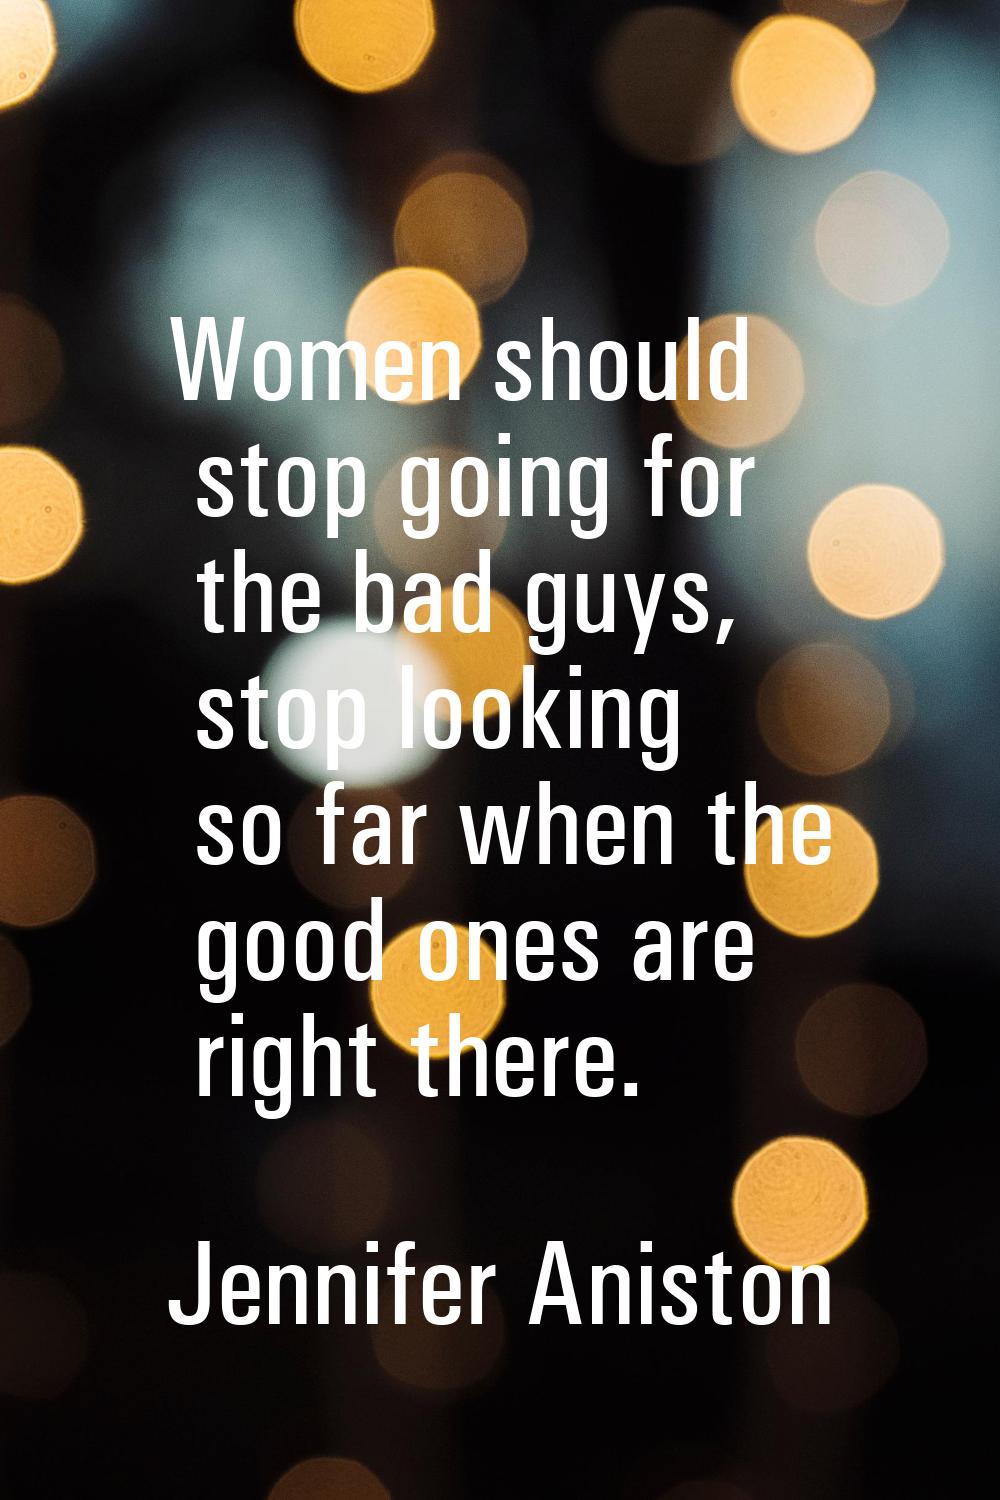 Women should stop going for the bad guys, stop looking so far when the good ones are right there.